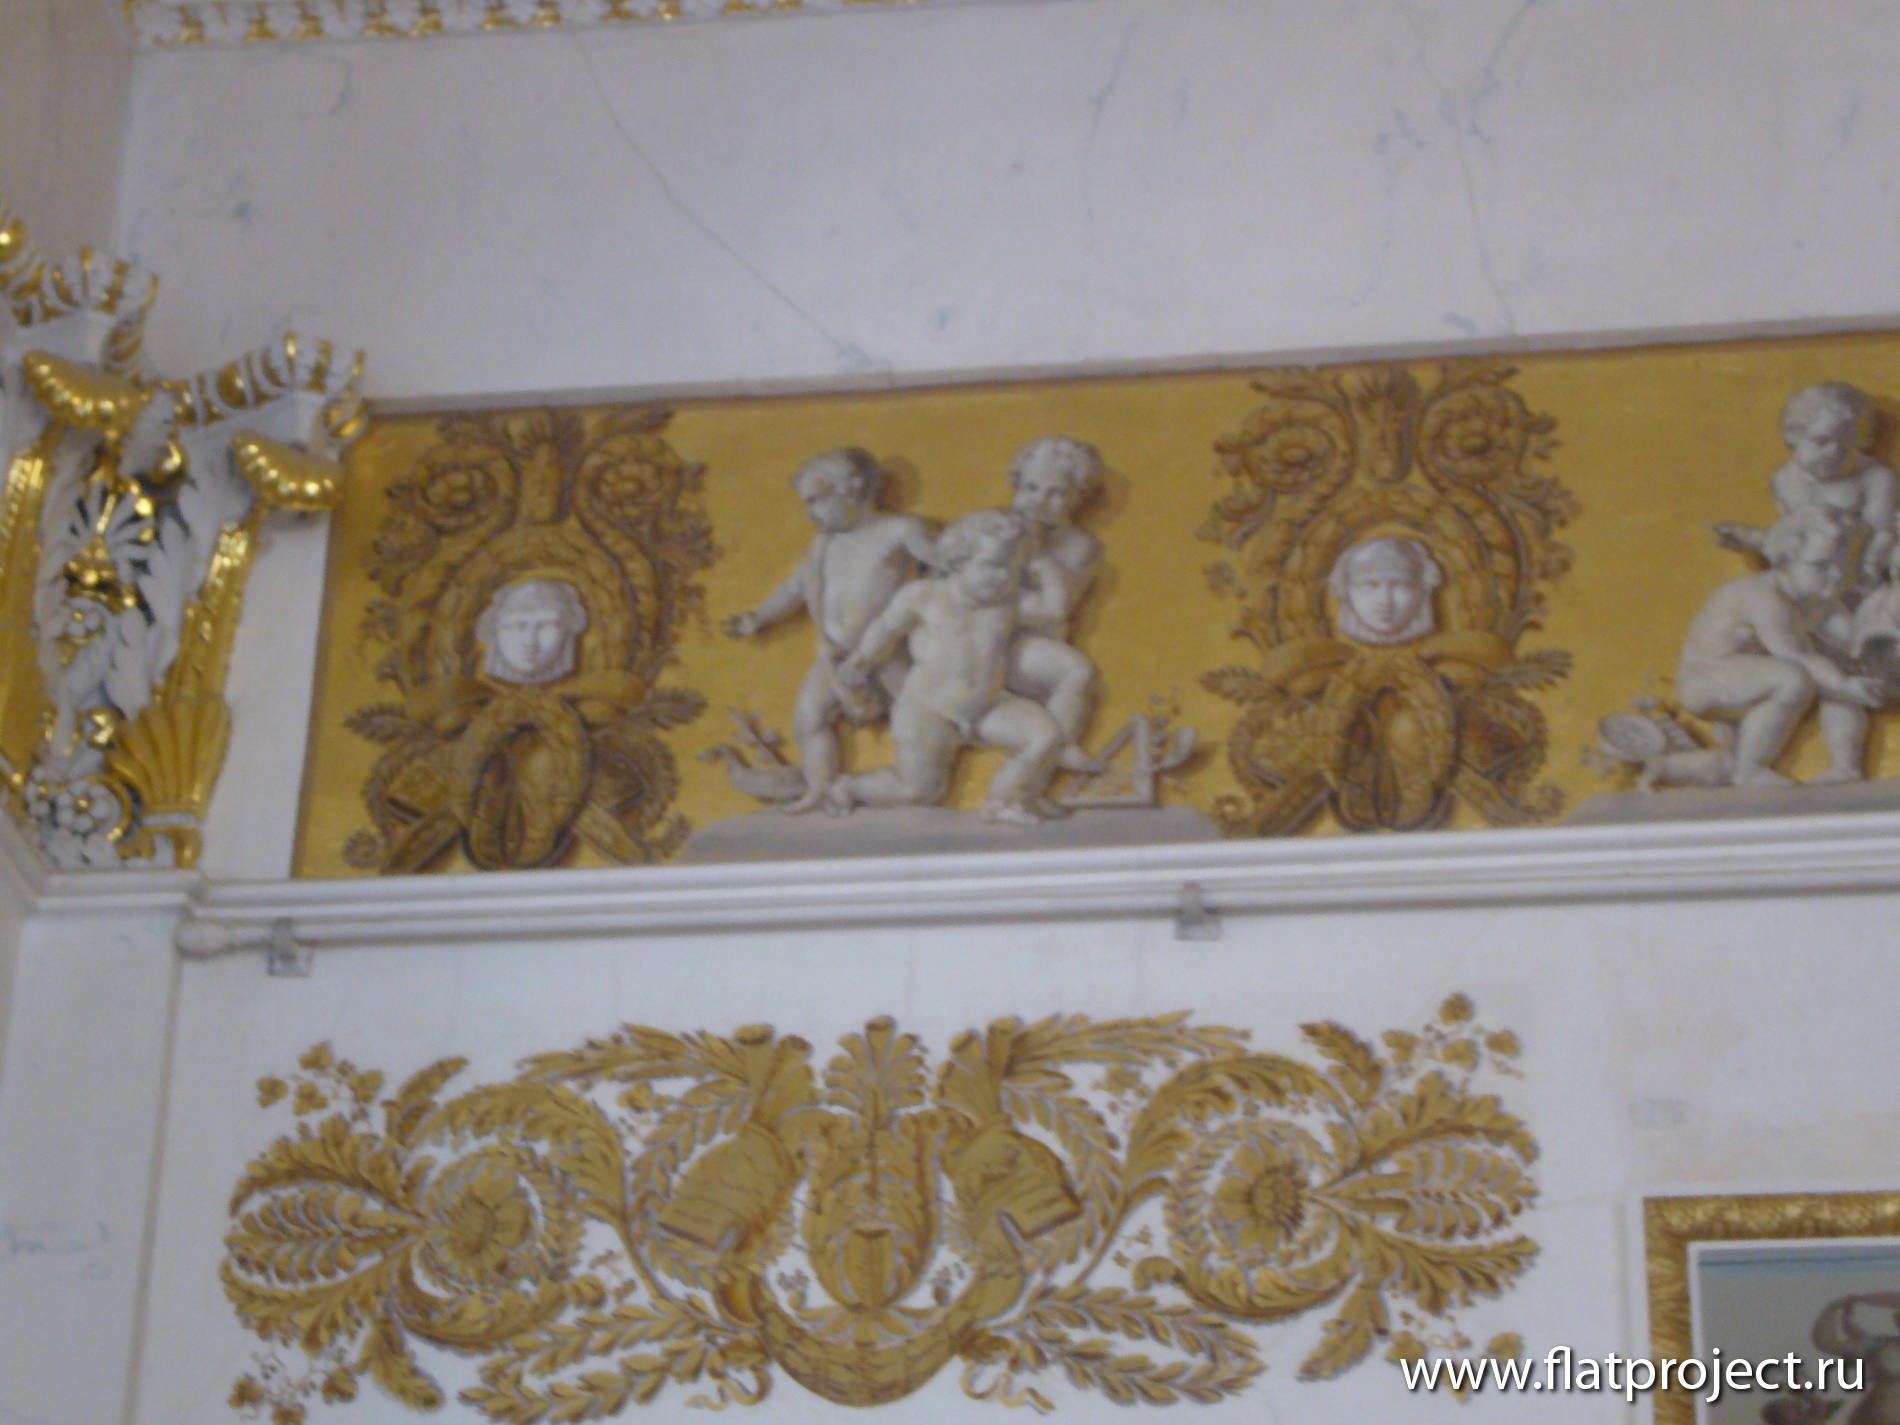 The State Russian museum interiors – photo 115